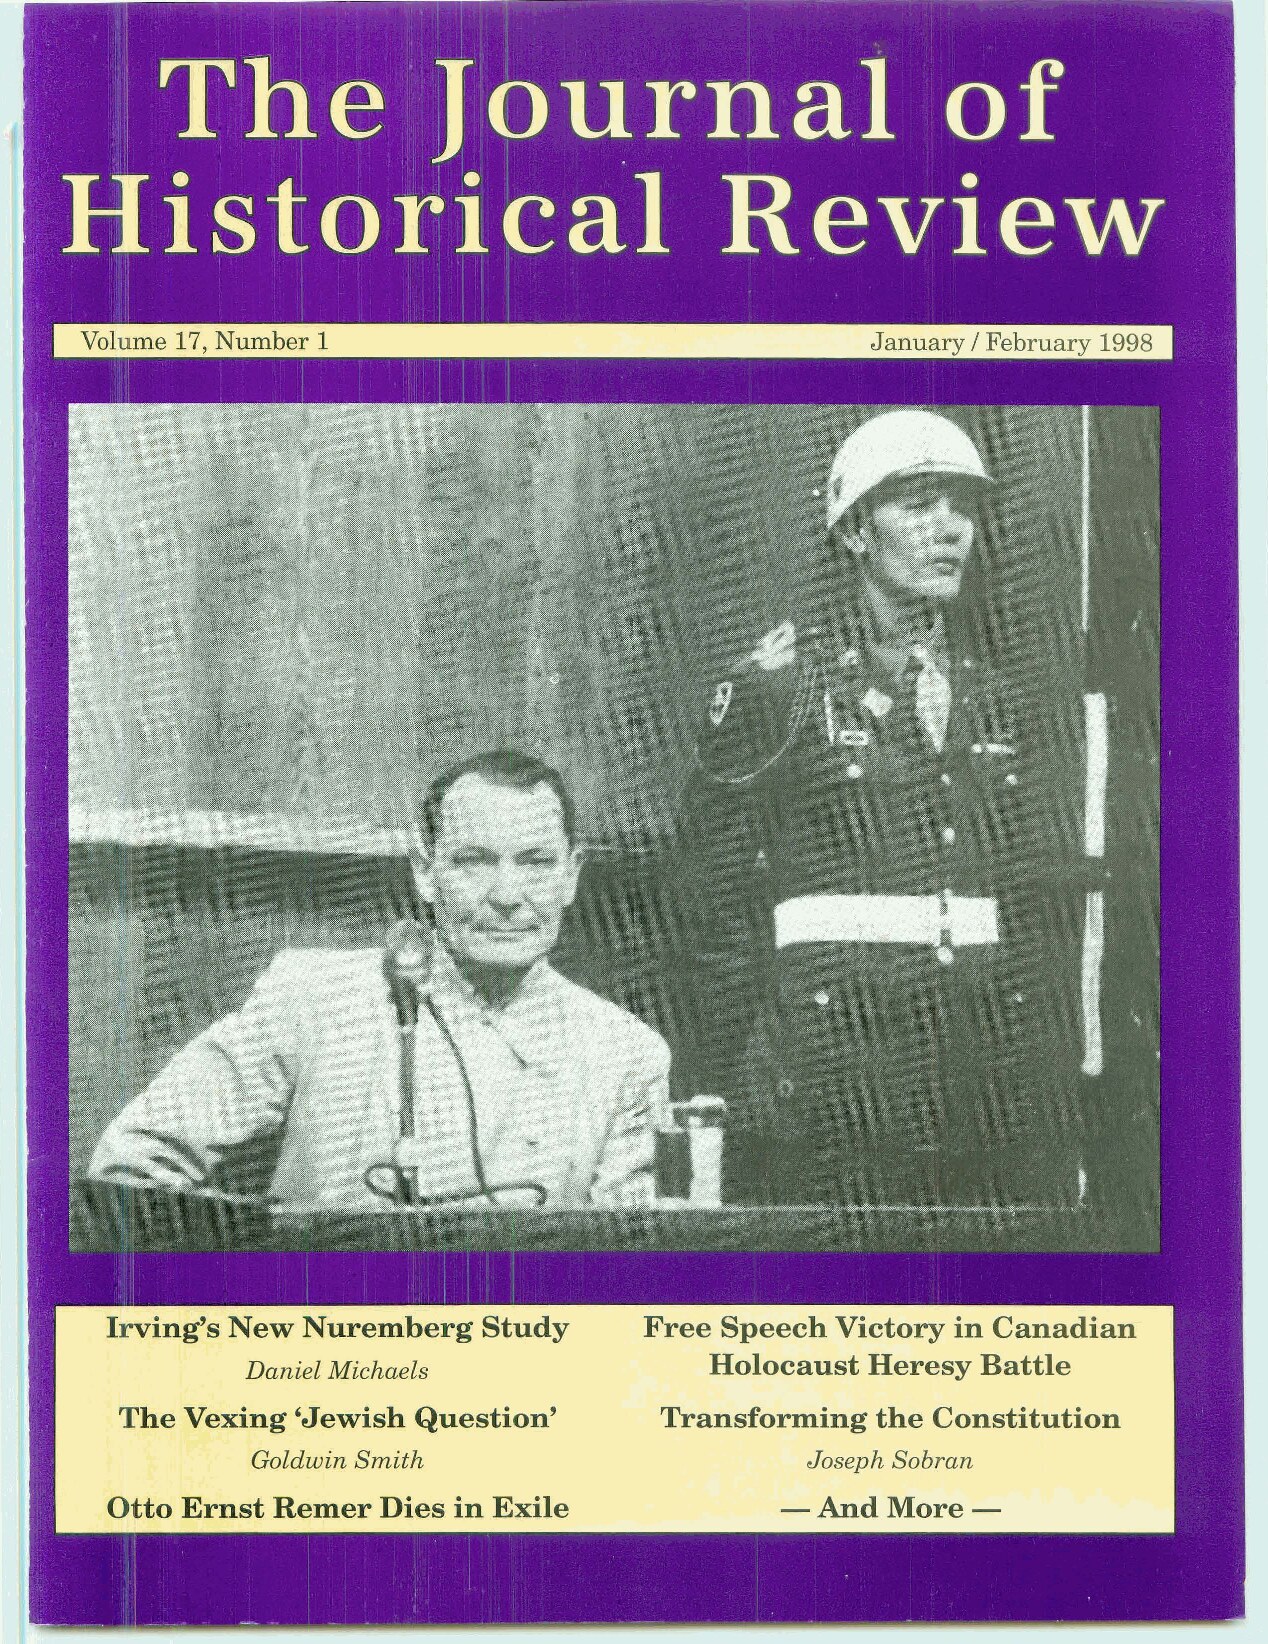 The Journal of Historical Review - Volume 17